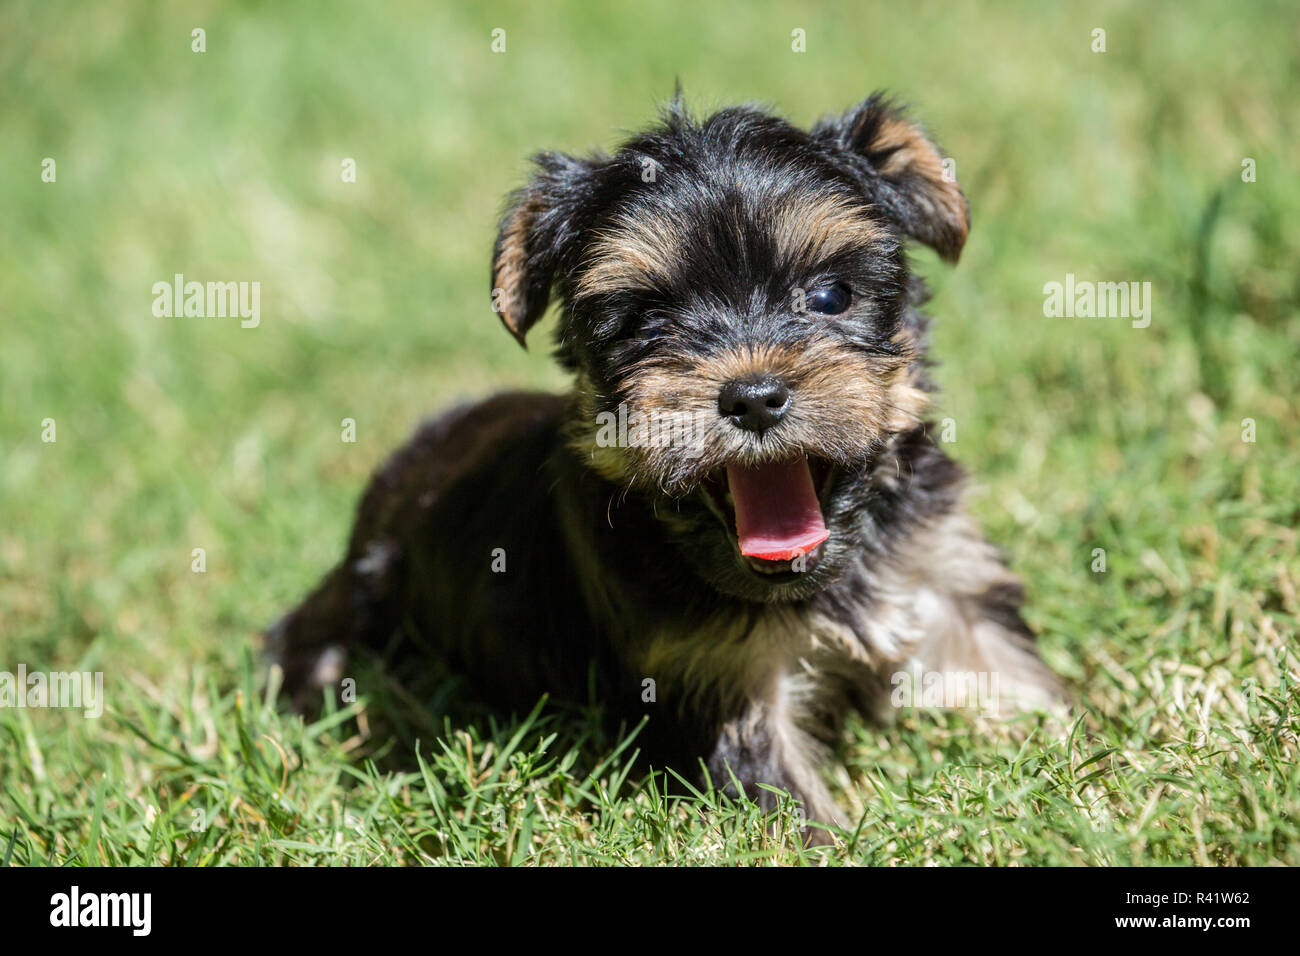 Issaquah, Washington State, USA. Cute tiny Yorkshire Terrier puppy experiencing his first trip outside on a lawn. (PR) Stock Photo